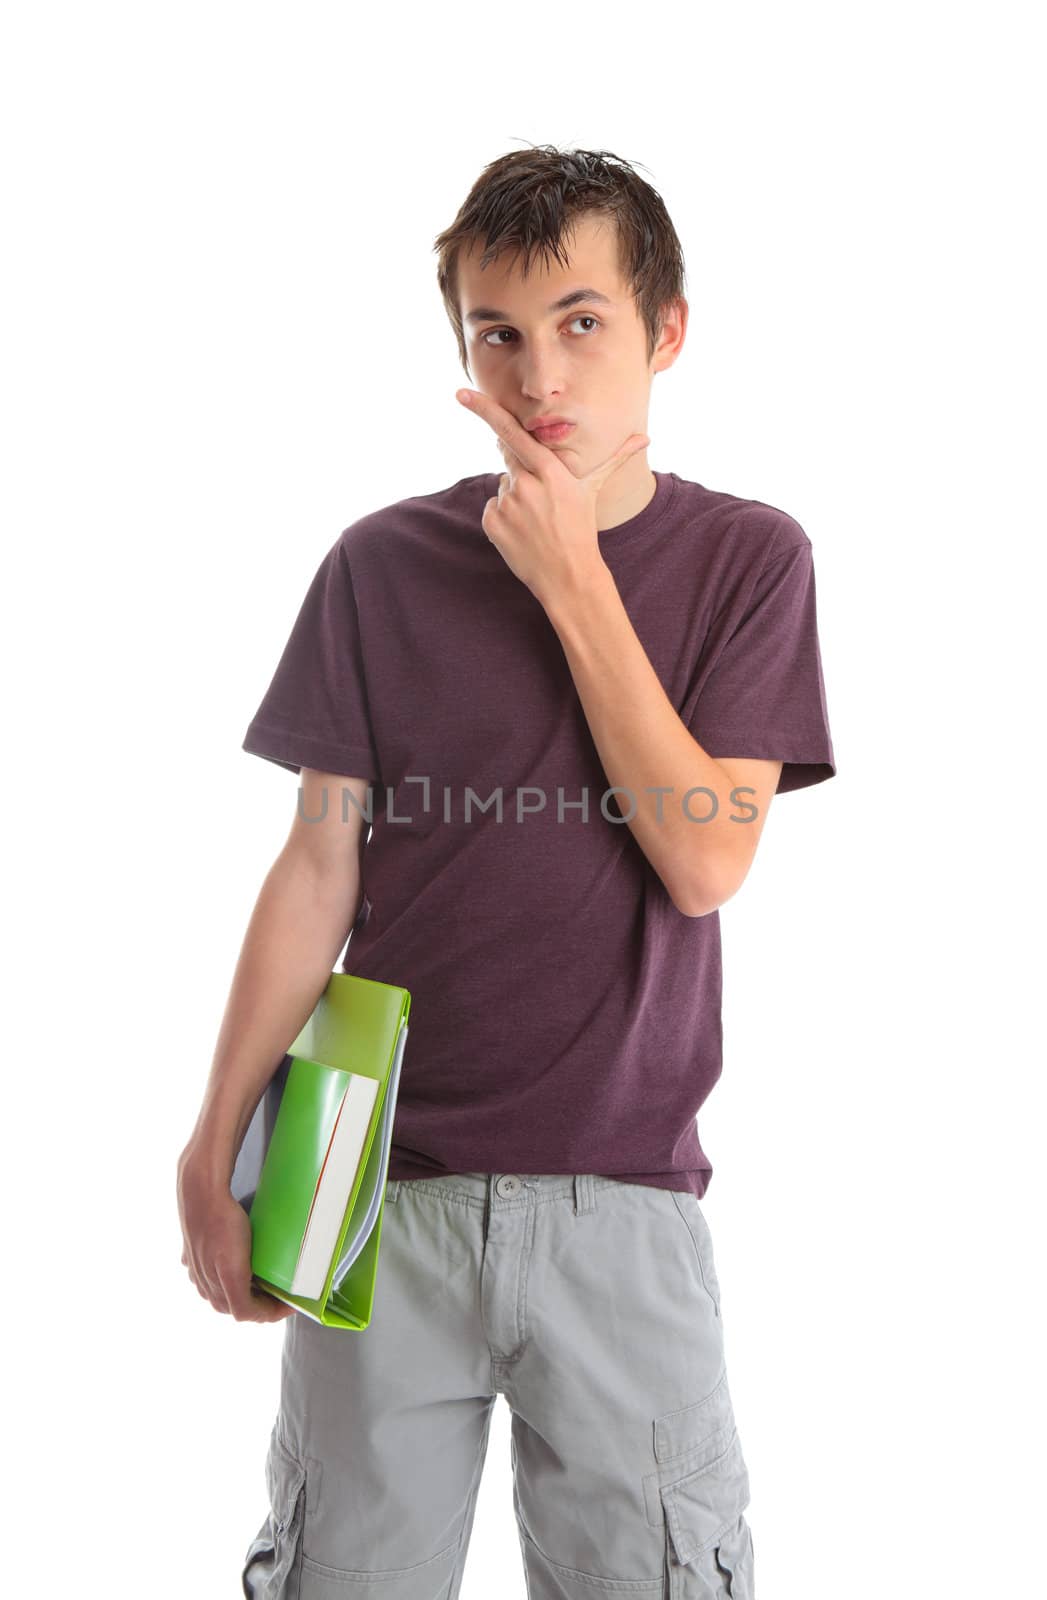 Student carrying books in a thinking, pondering, deliberative expression and looking sideways.  White background.